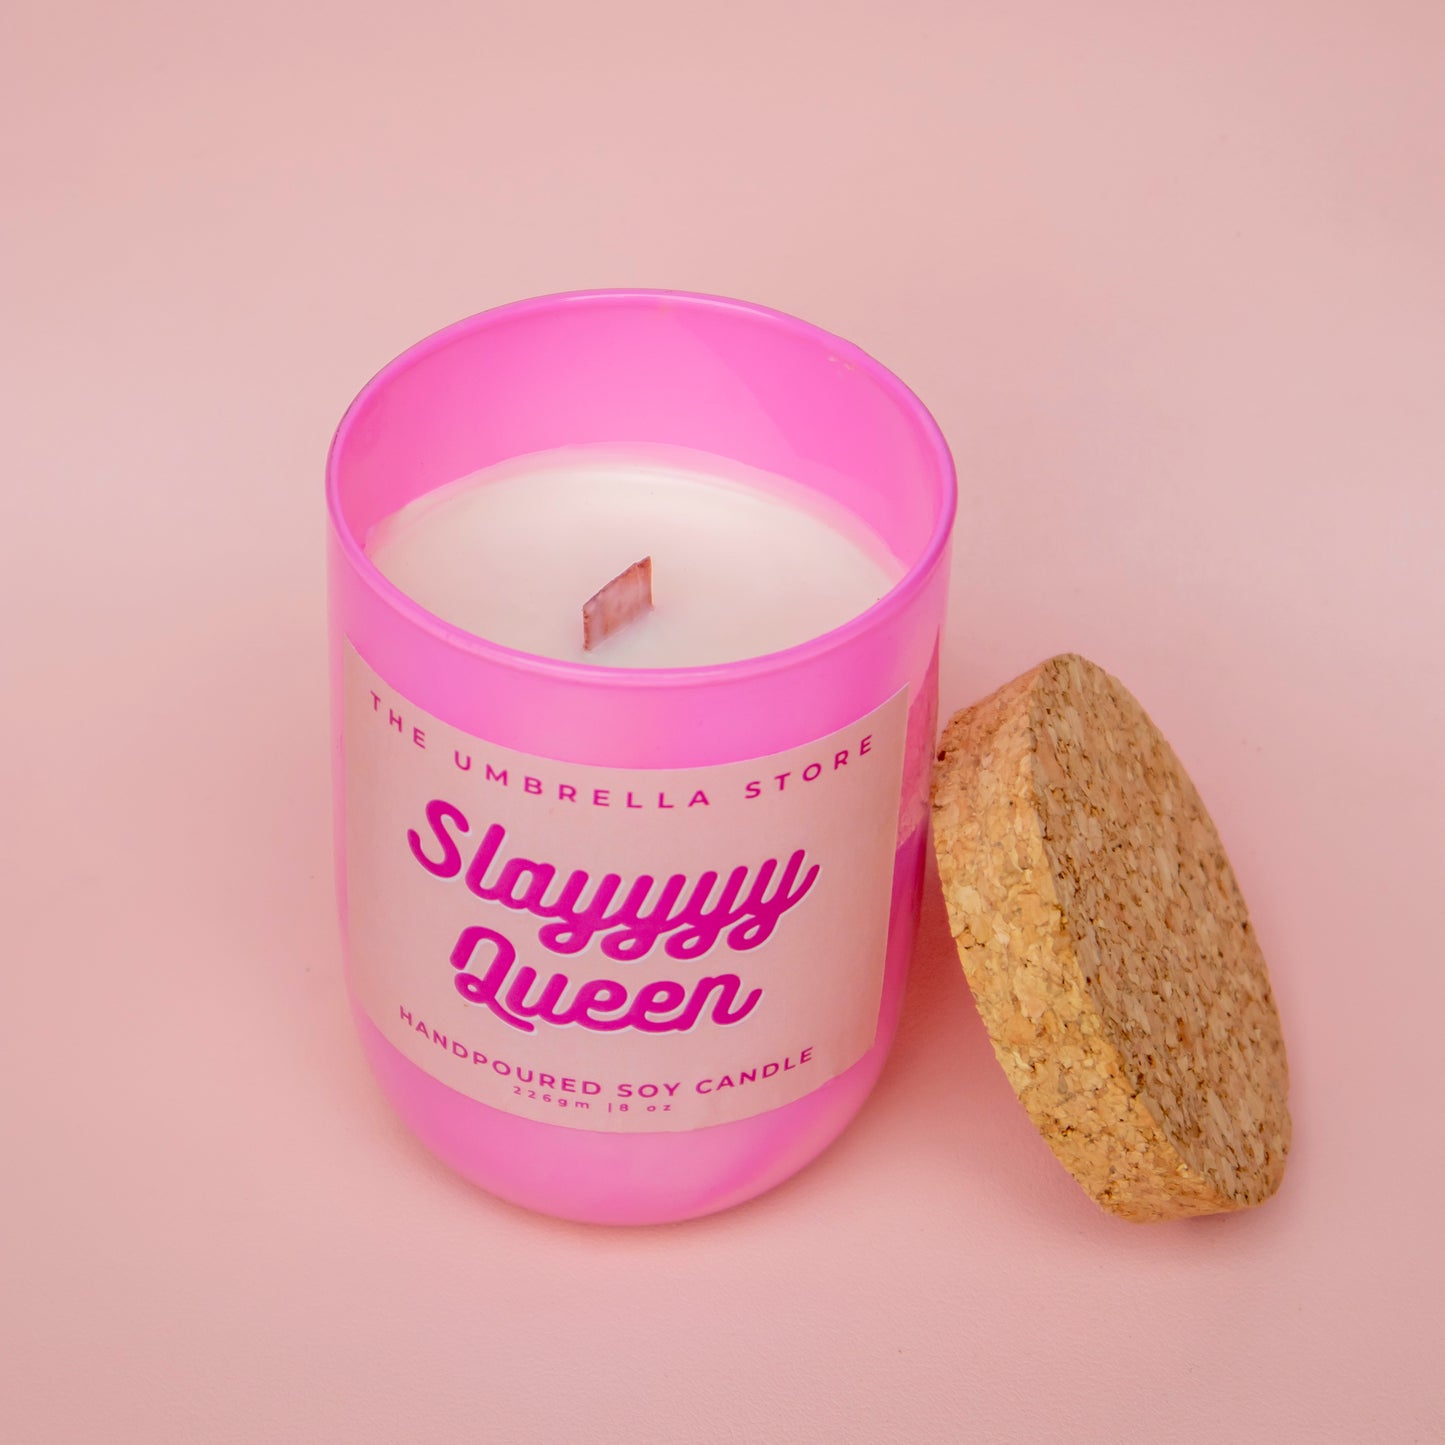 Slayyy queen scented candle